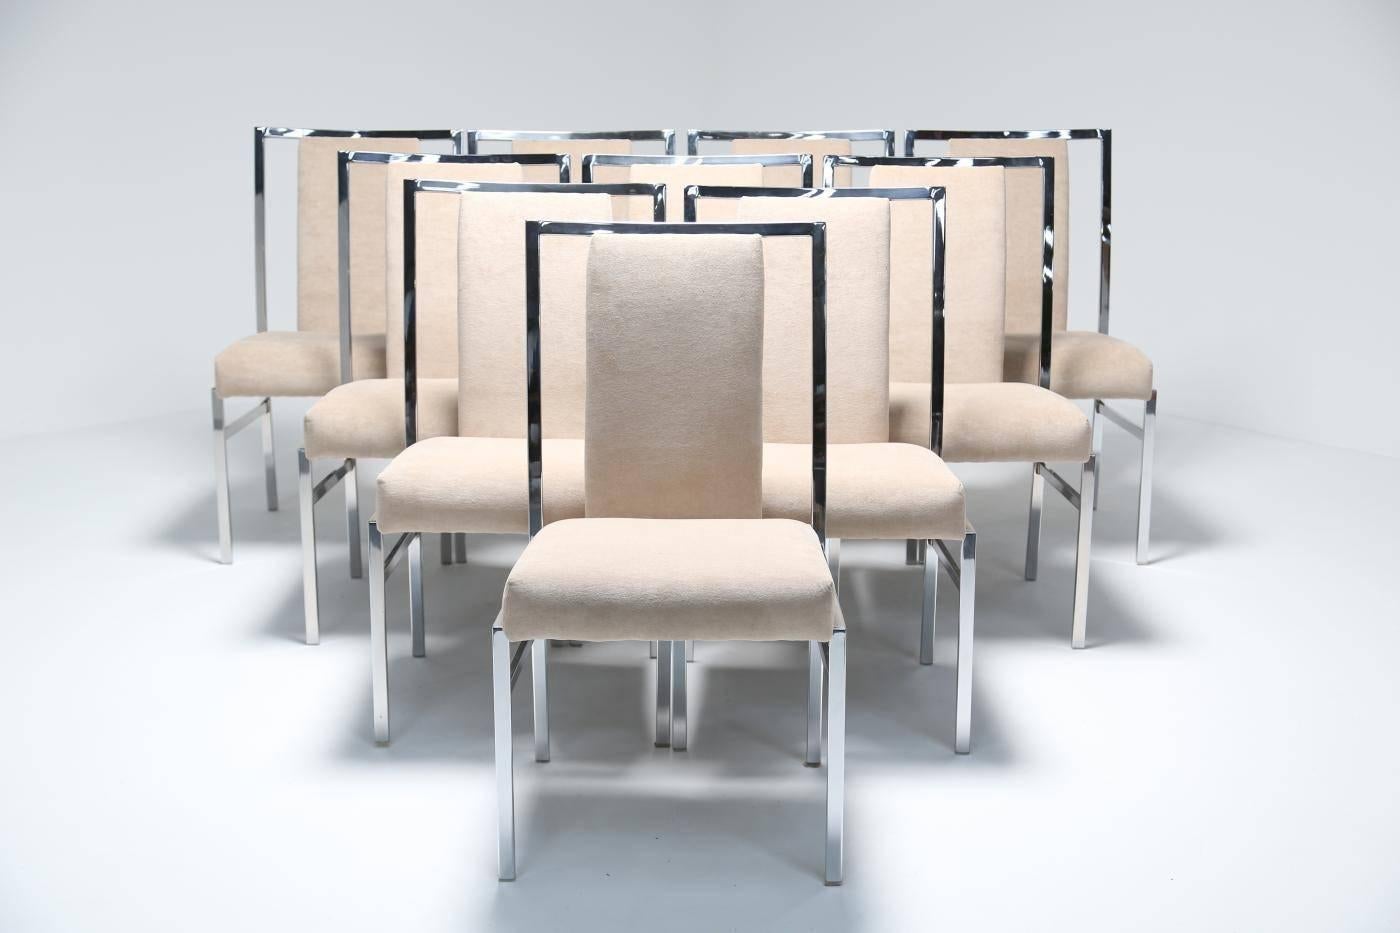 A set of ten chrome framed dining chairs made by Daystrom and generally sold with the Pierre Cardin furniture range. Daystrom were the licensed manufacturers of Pierre Cardin designs in the US, these chairs have no Pierre Cardin markings but they